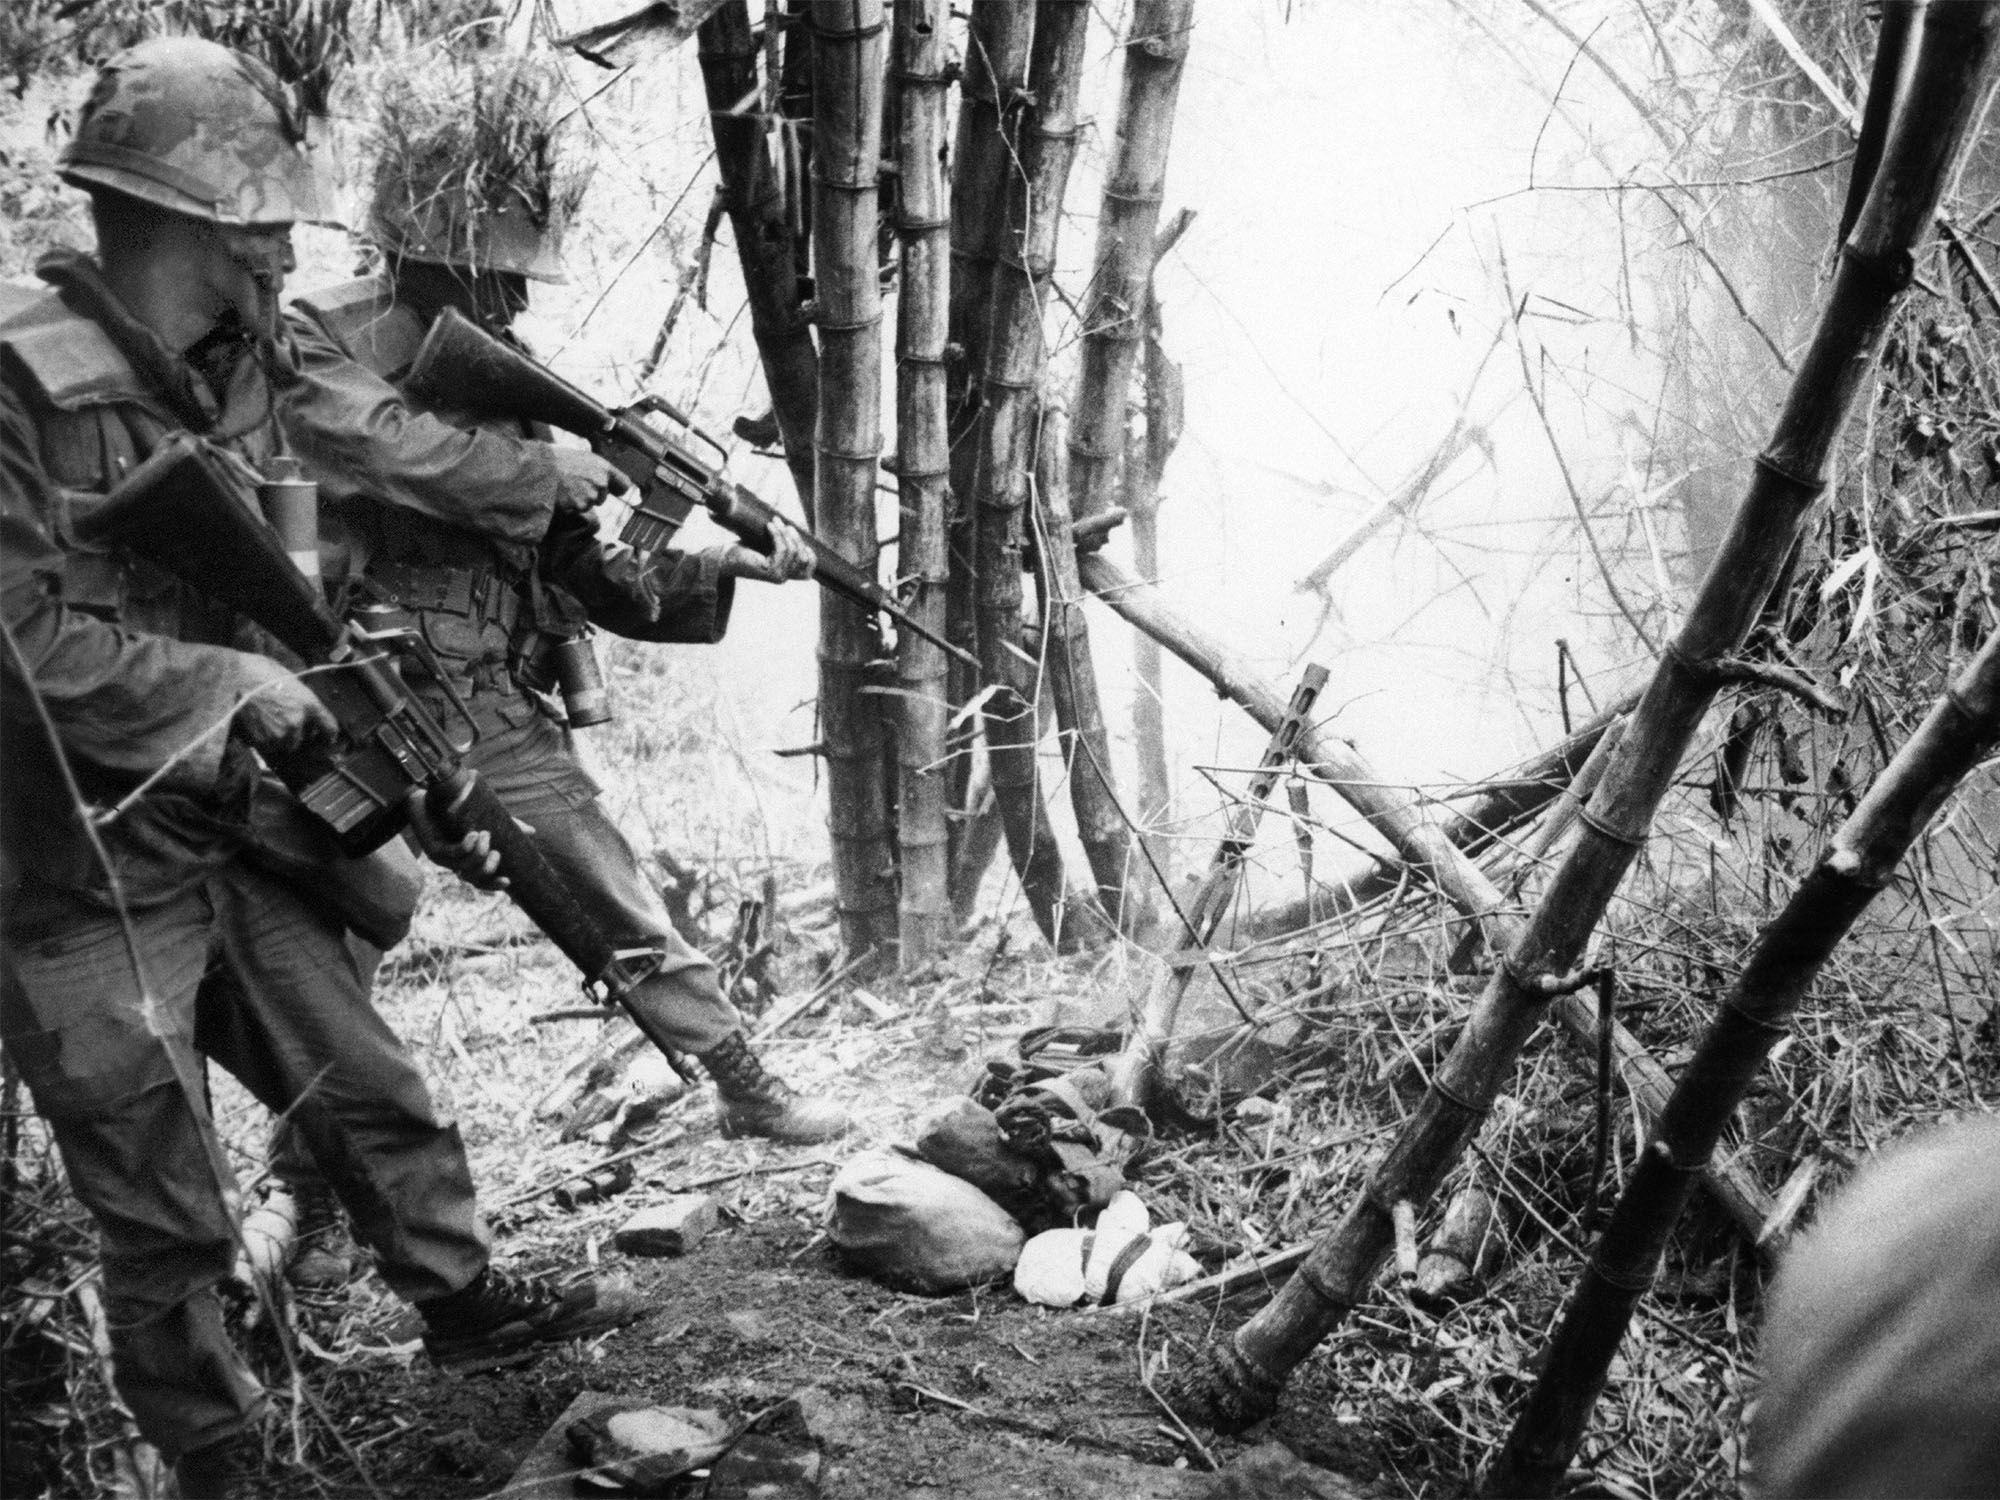 South Korean soldiers ("ROK Tigers") shooting in the region of Qui Nhon, in the South of Vietnam